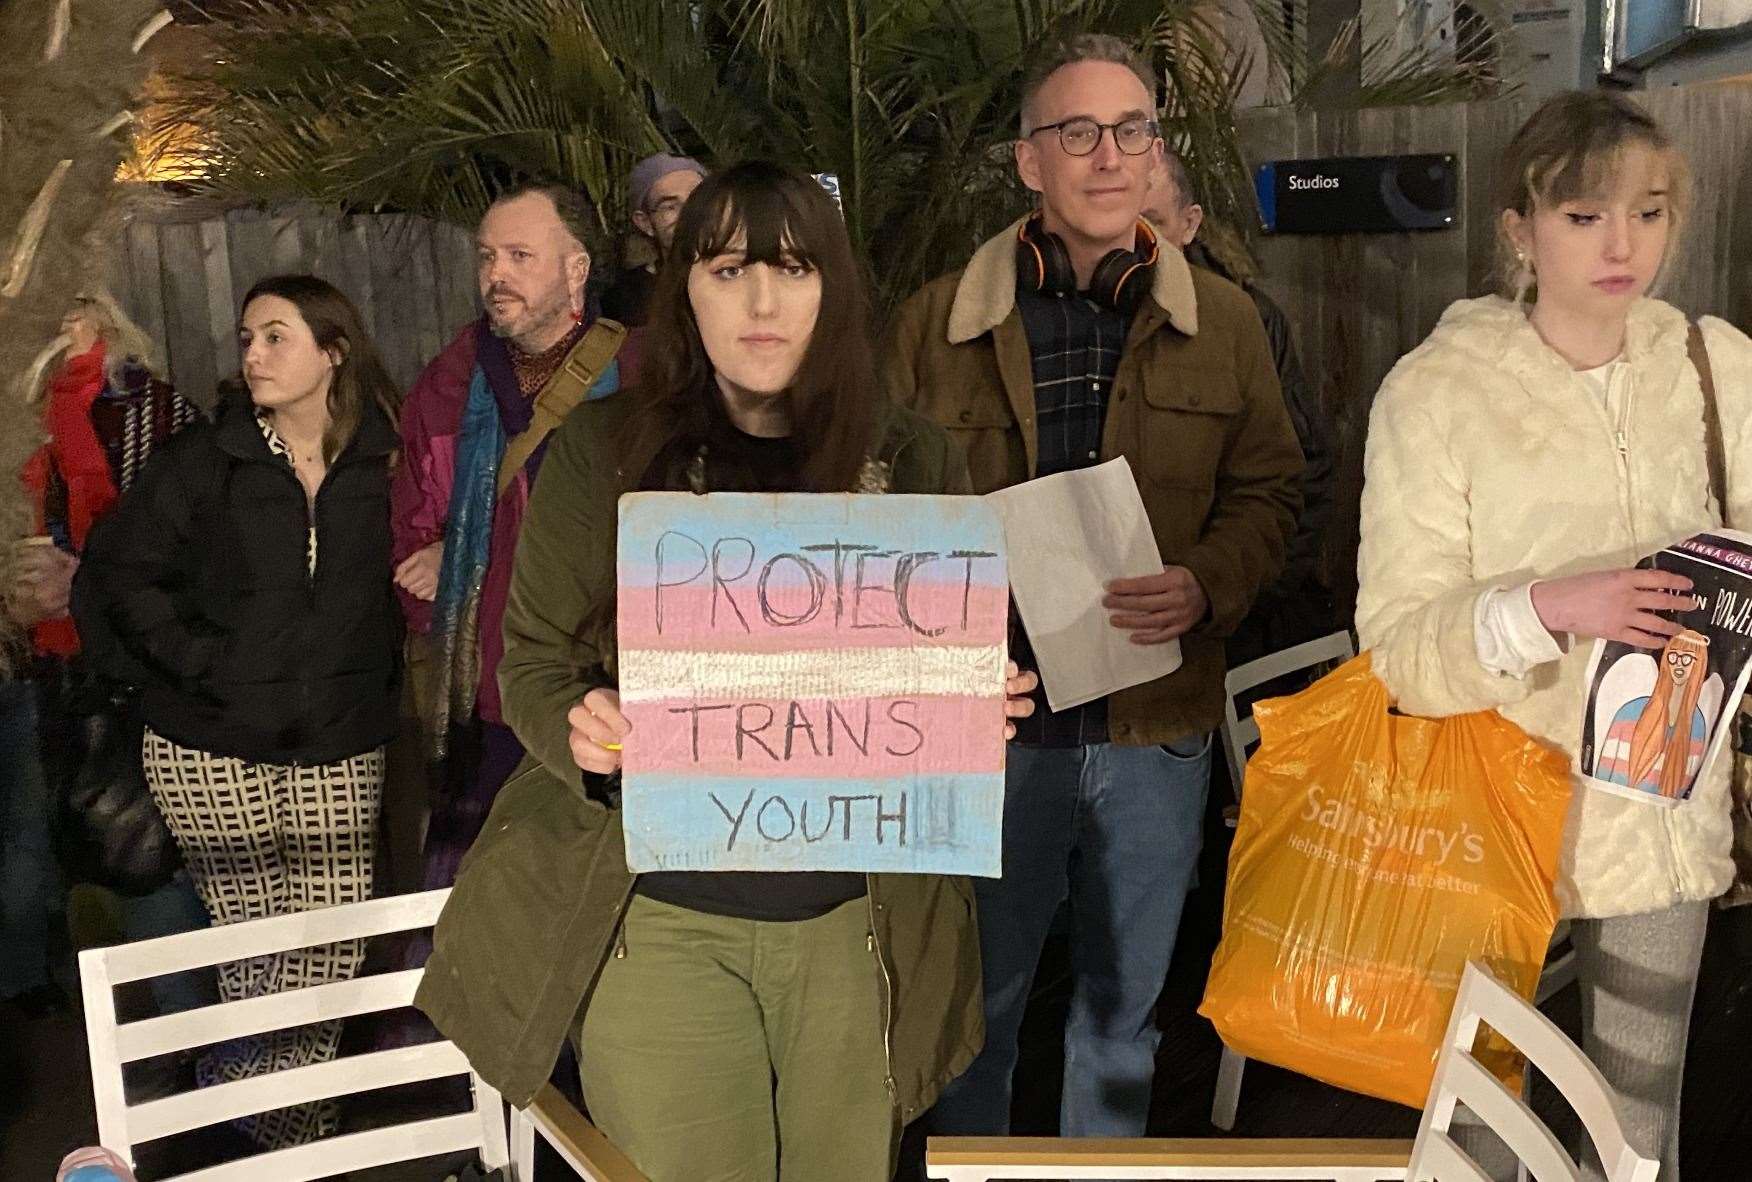 A vigil was held in Chatham to mourn 16-year-old Brianna Ghey, a transgender girl who was stabbed to death in Cheshire. Picture: Shea Coffey (62506461)